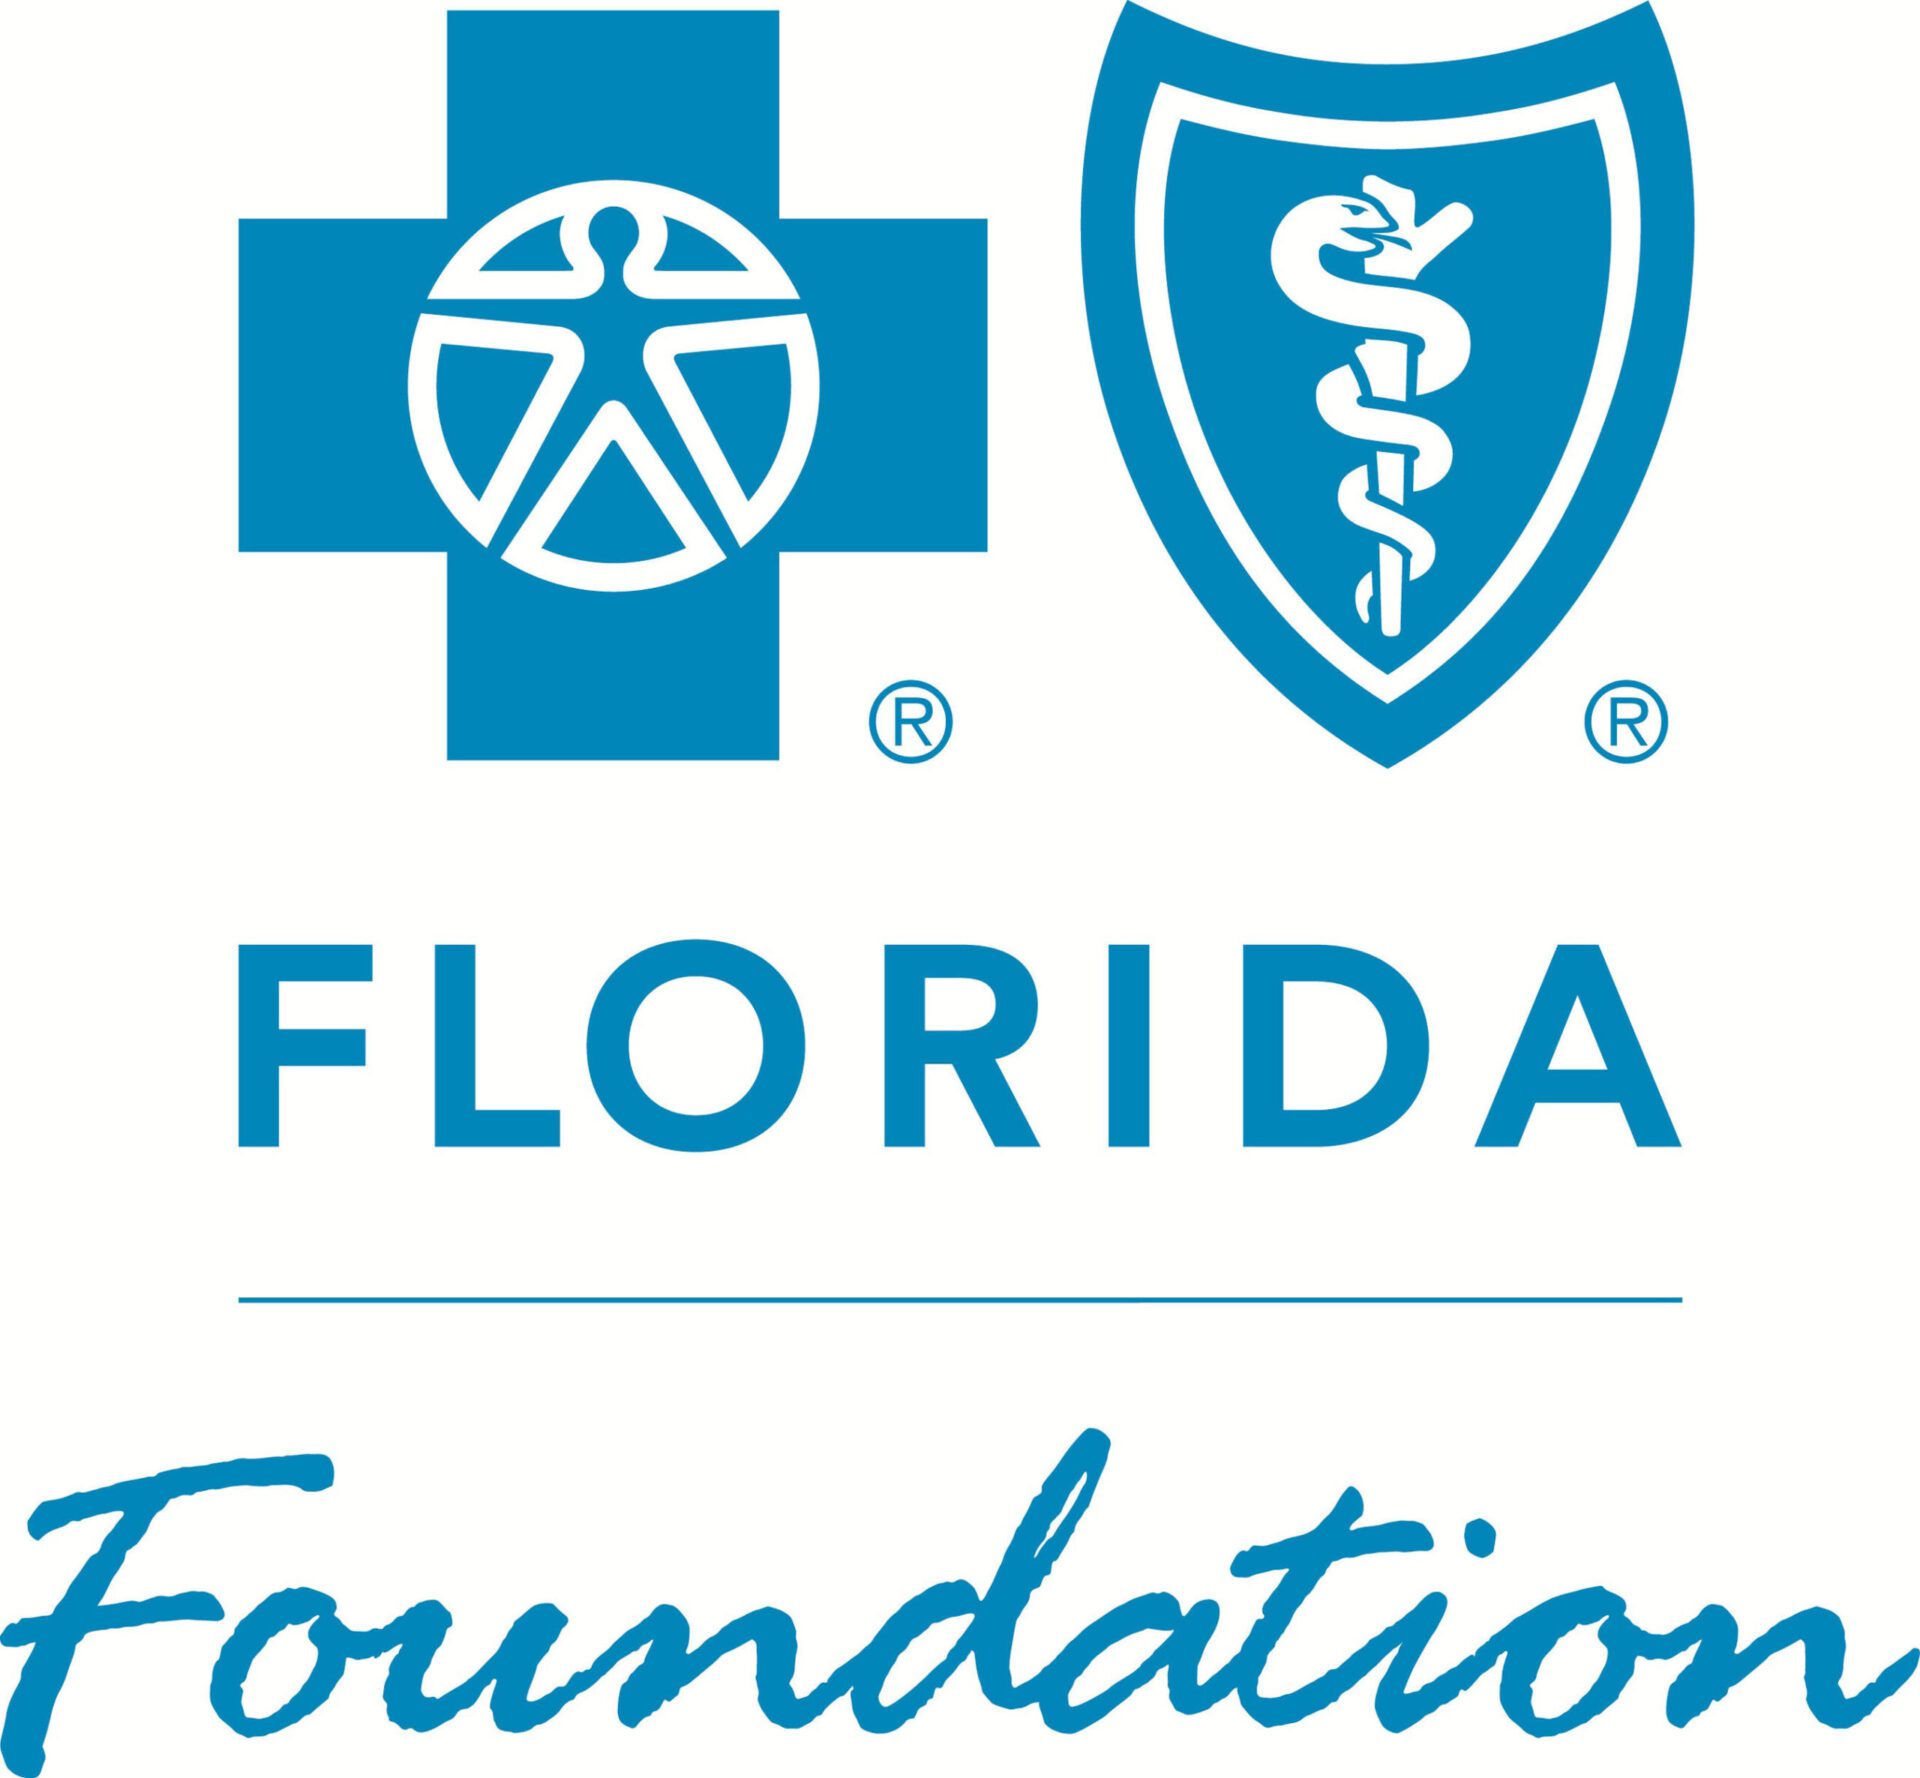 EPILEPSY ALLIANCE FLORIDA NAMED RECIPIENT OF $300,000 GRANT FROM FLORIDA BLUE FOUNDATION TO AID HEALTH LITERACY